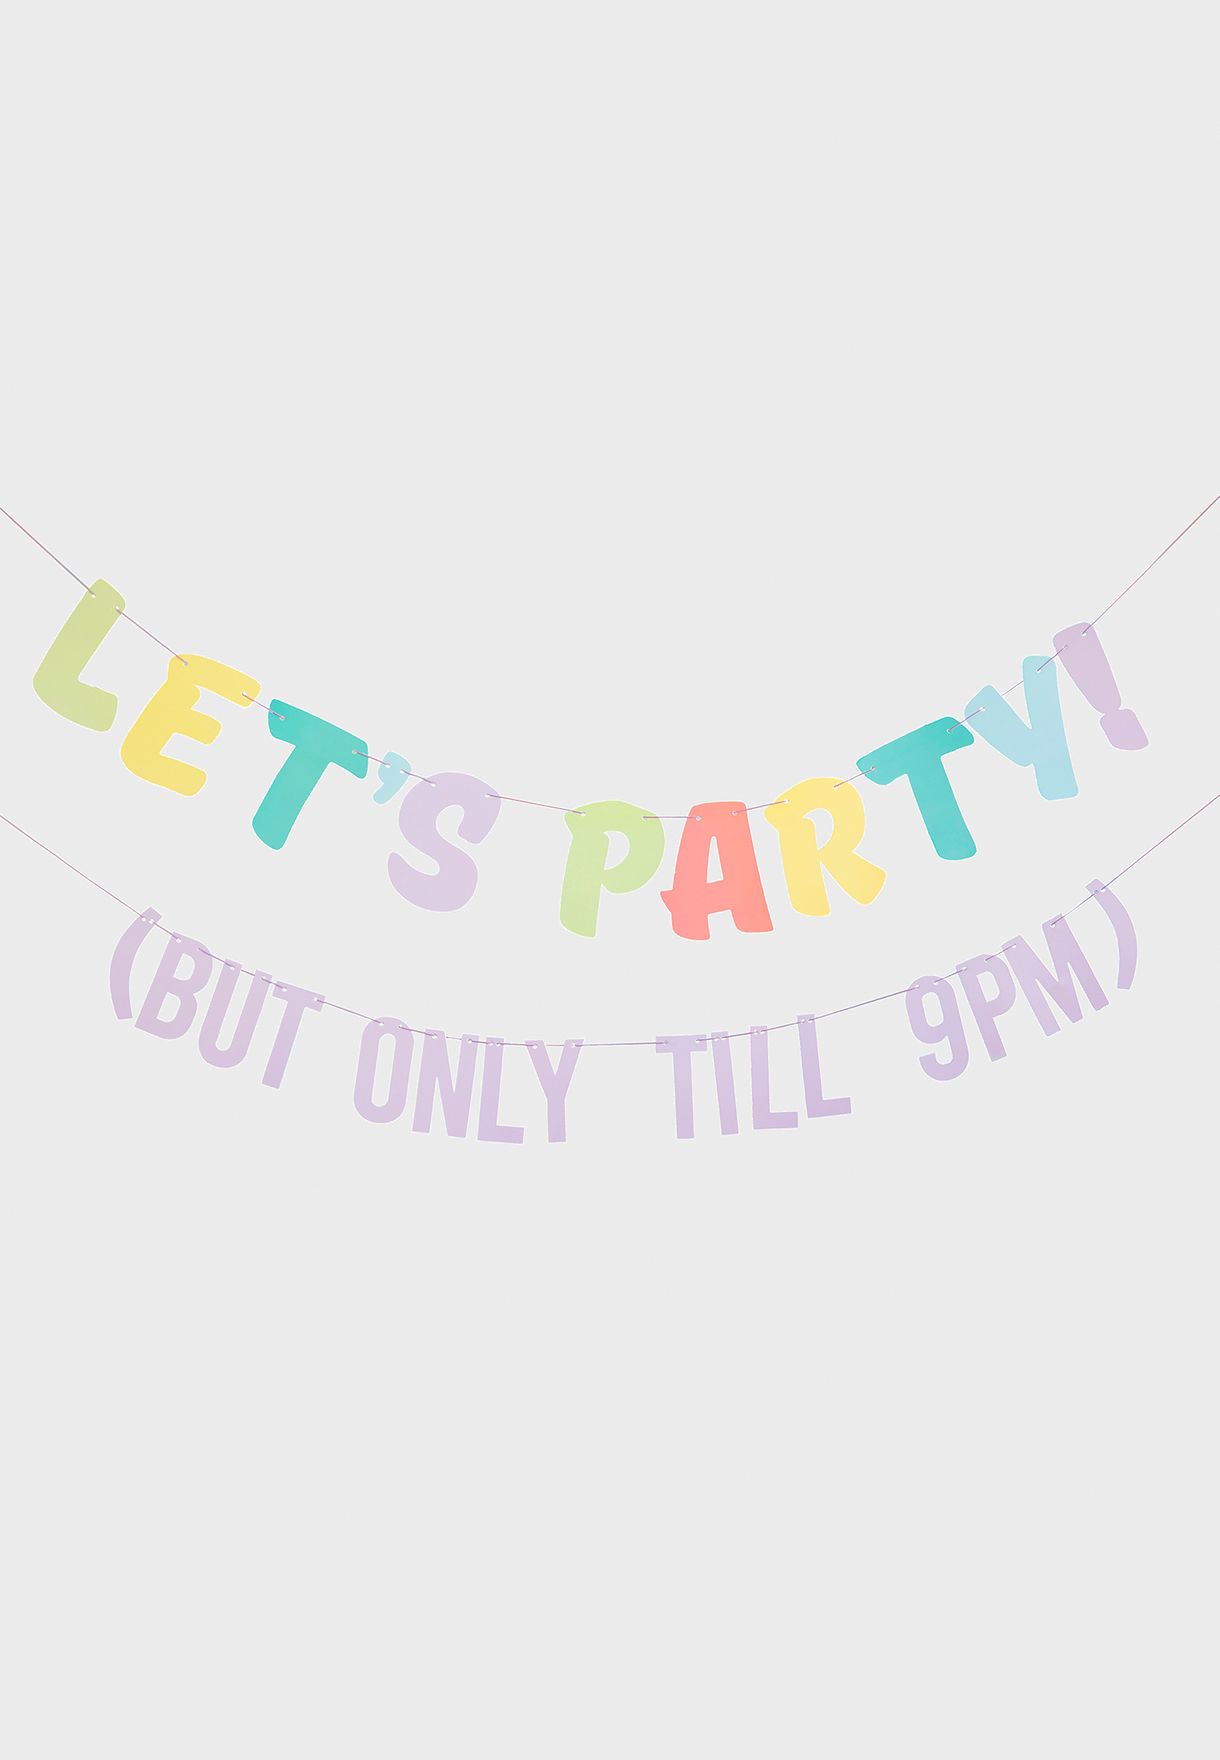 Let's Party! But Only Till 9Pm Bunting